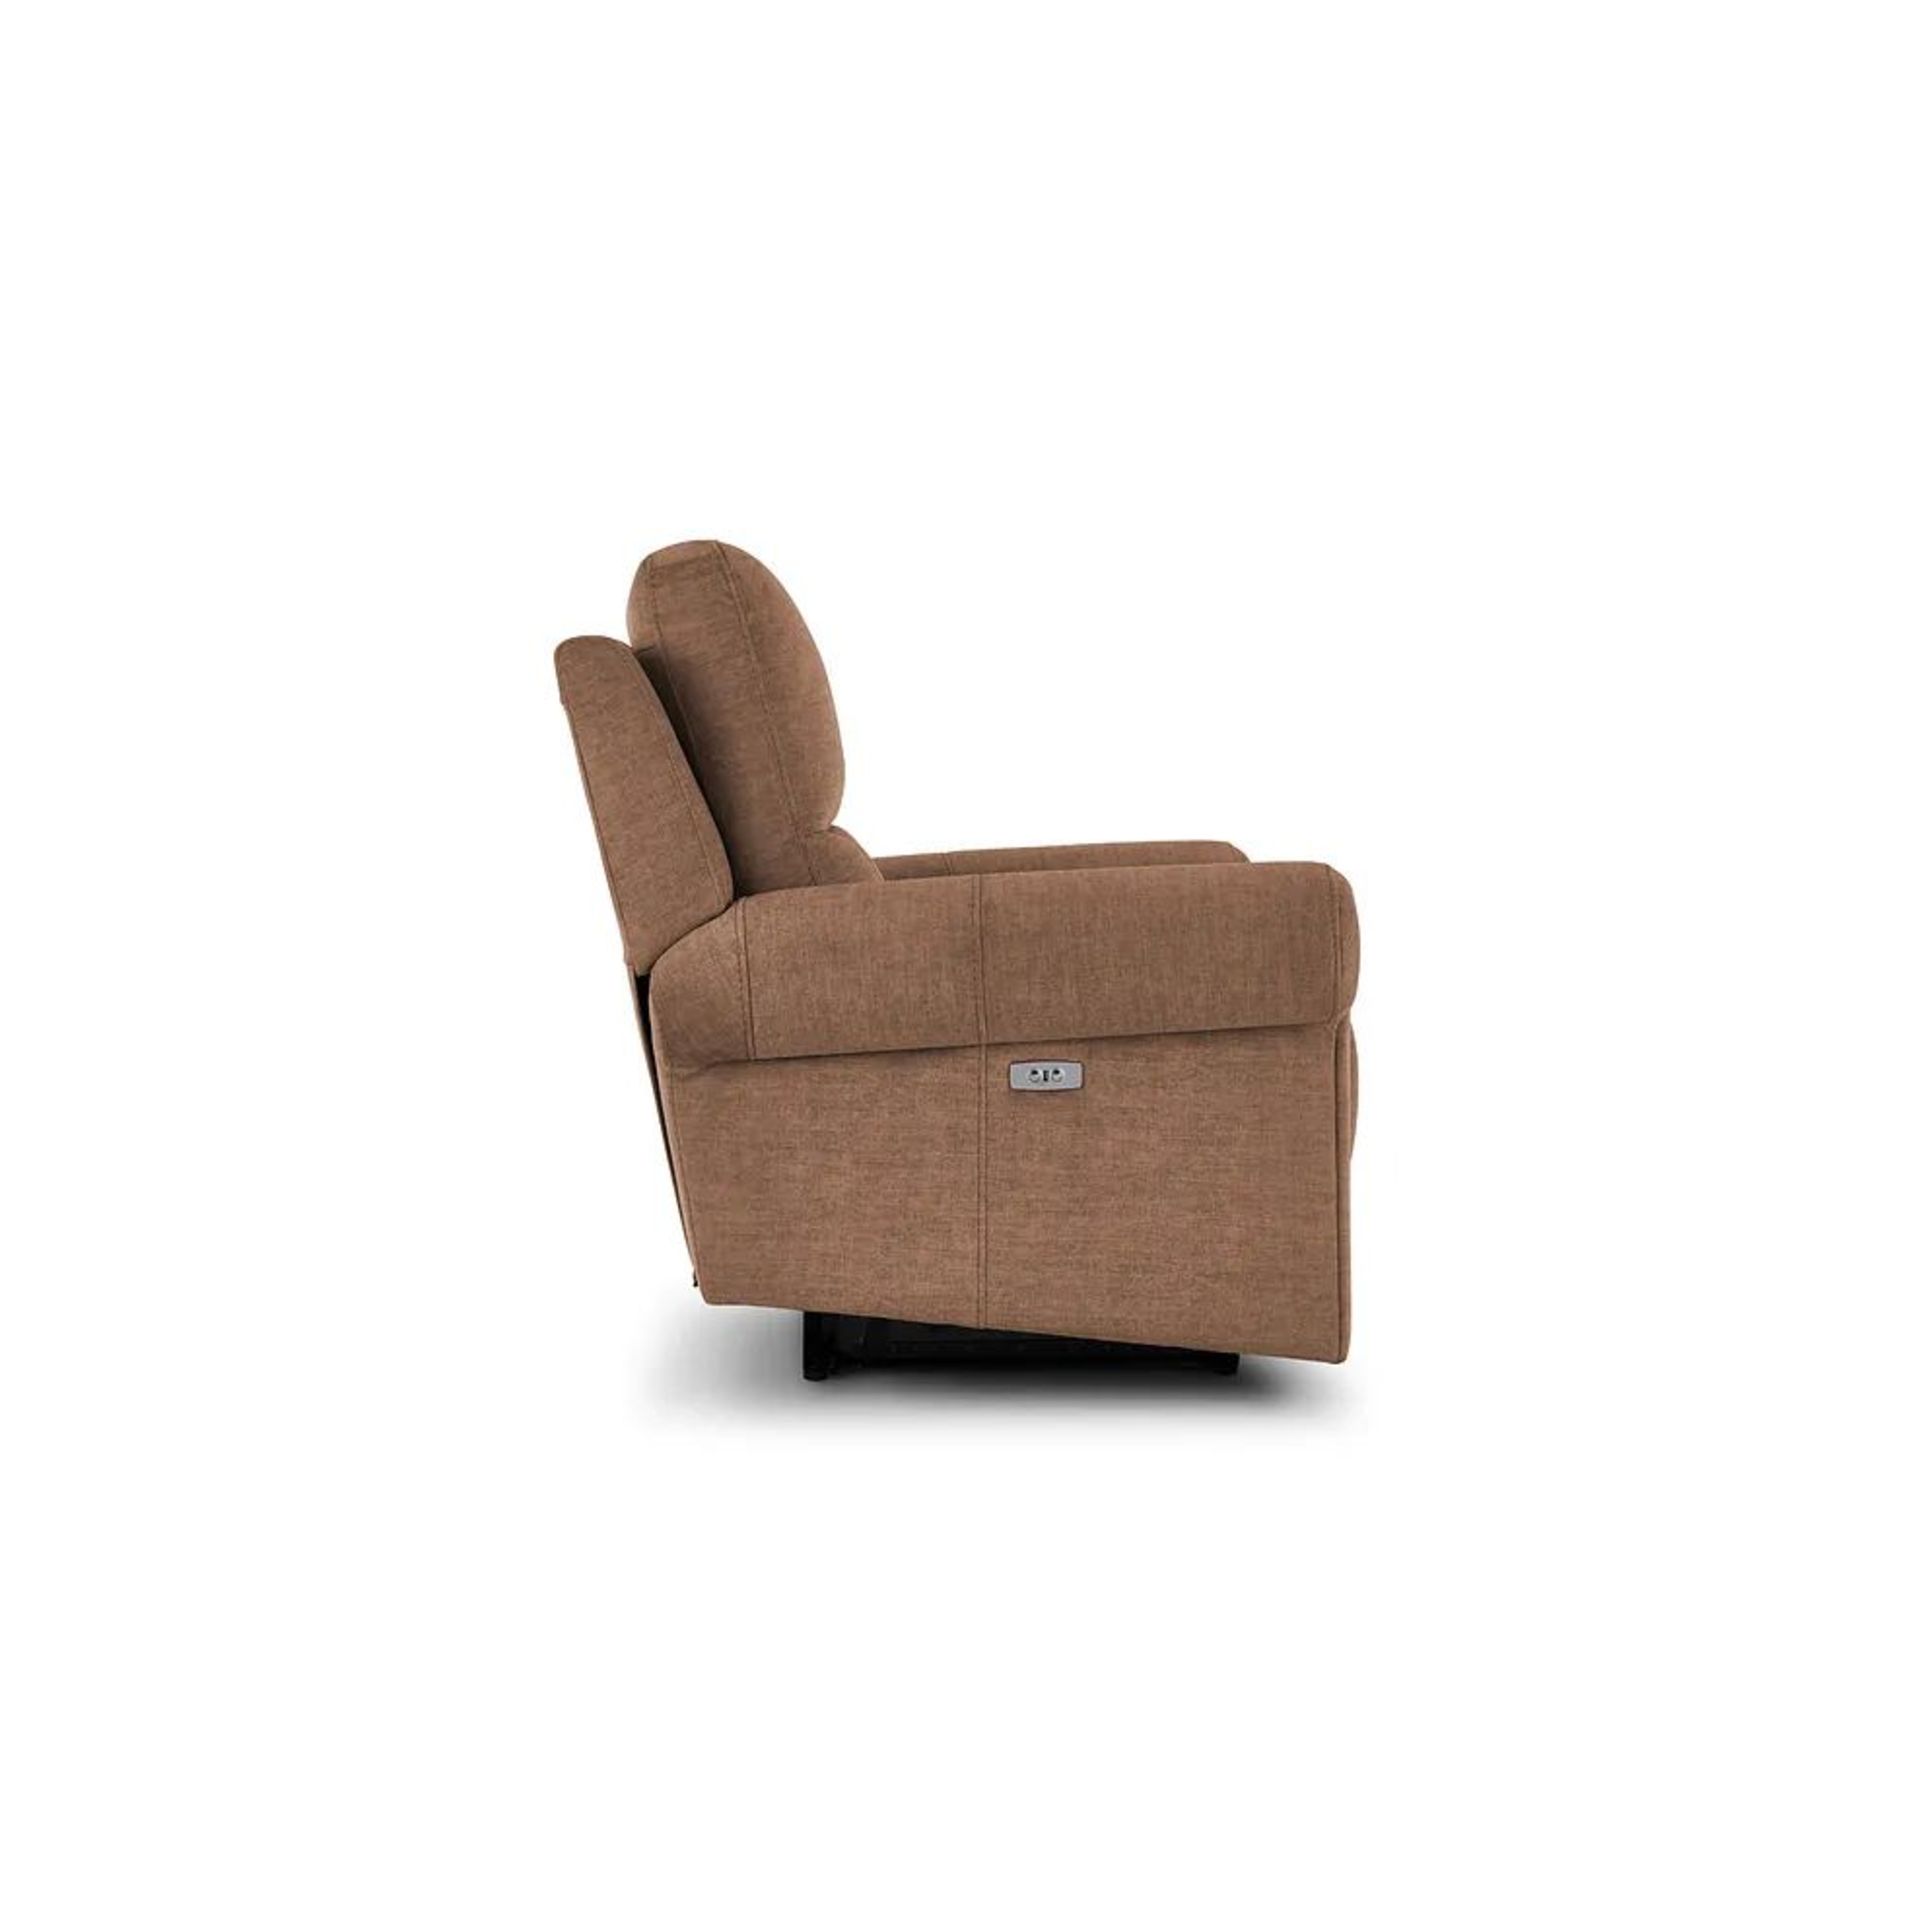 BRAND NEW COLORADO Electric Recliner Armchair - PLUSH BROWN FABRIC. RRP £799. Shown here in Plush - Image 6 of 11